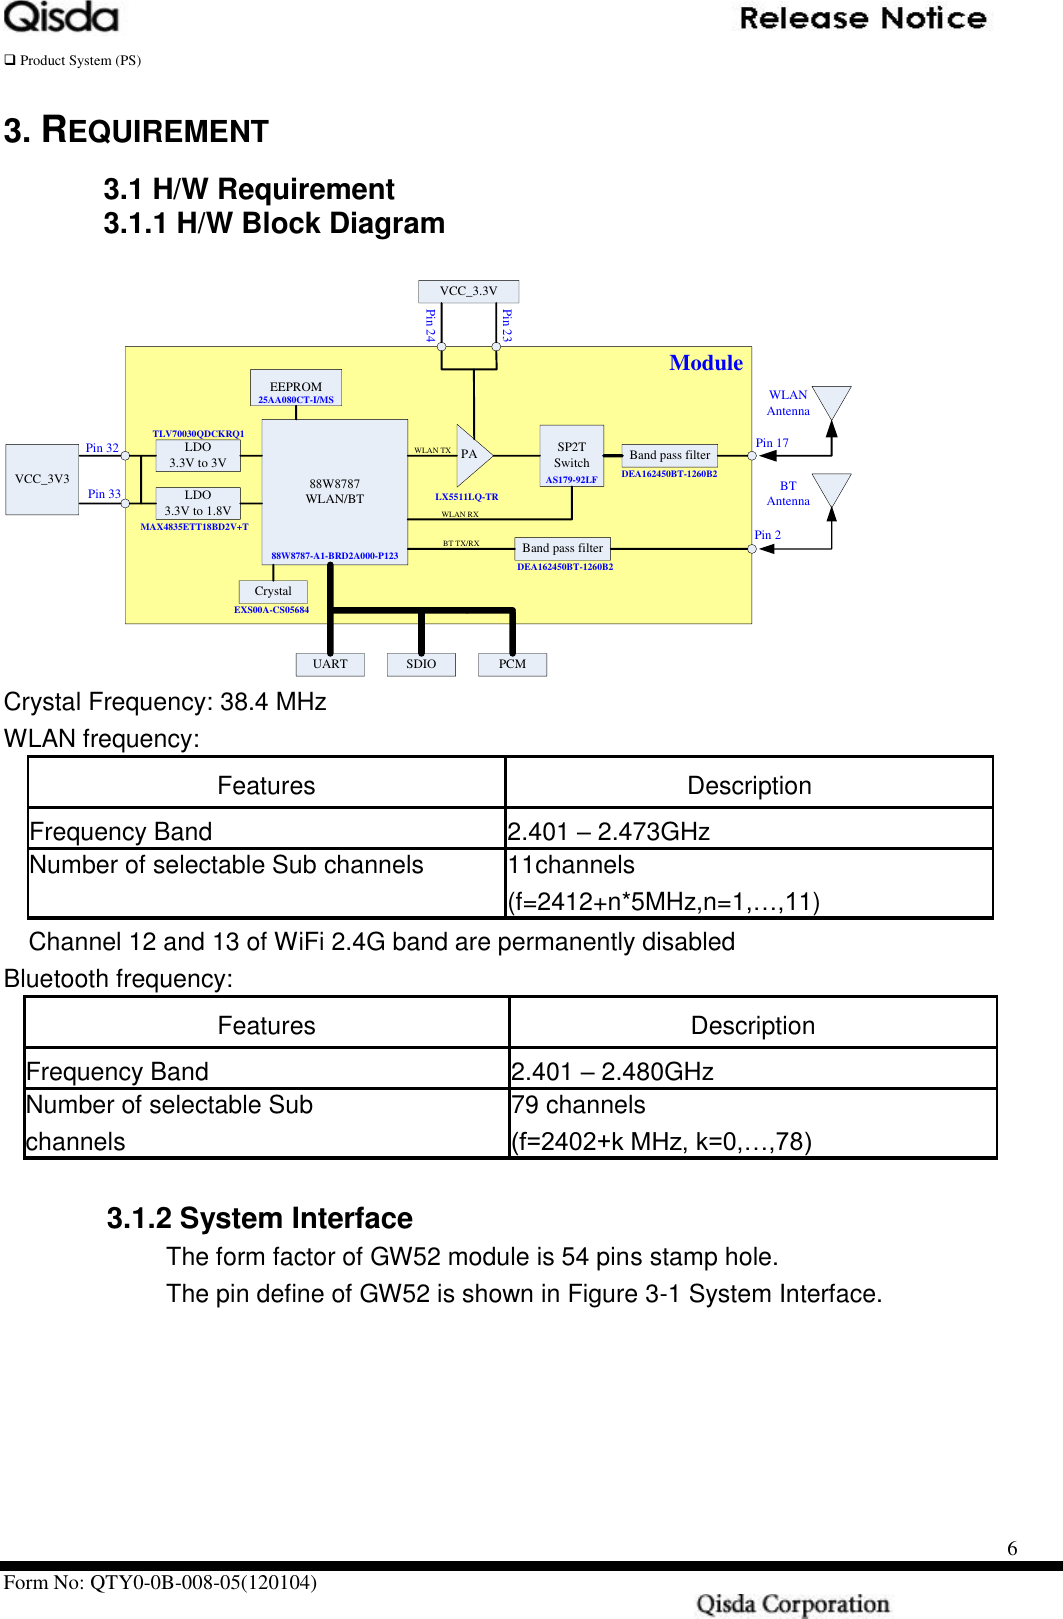   Product System (PS)      Form No: QTY0-0B-008-05(120104)                                                    6 3. REQUIREMENT 3.1 H/W Requirement   3.1.1 H/W Block Diagram  88W8787WLAN/BTPABand pass filterEEPROMCrystalSP2TSwitch Band pass filterUART SDIO PCMLDO3.3V to 3VVCC_3.3VLDO3.3V to 1.8VVCC_3V3ModulePin 23Pin 24Pin 32Pin 33WLANAntennaBTAntennaAS179-92LFLX5511LQ-TREXS00A-CS05684MAX4835ETT18BD2V+TTLV70030QDCKRQ1DEA162450BT-1260B2DEA162450BT-1260B225AA080CT-I/MS88W8787-A1-BRD2A000-P123WLAN TXWLAN RXBT TX/RXPin 17Pin 2 Crystal Frequency: 38.4 MHz WLAN frequency: Features Description Frequency Band 2.401 – 2.473GHz   Number of selectable Sub channels 11channels (f=2412+n*5MHz,n=1,…,11)   Channel 12 and 13 of WiFi 2.4G band are permanently disabled Bluetooth frequency: Features Description Frequency Band 2.401 – 2.480GHz Number of selectable Sub channels 79 channels (f=2402+k MHz, k=0,…,78)            3.1.2 System Interface   The form factor of GW52 module is 54 pins stamp hole.   The pin define of GW52 is shown in Figure 3-1 System Interface.   